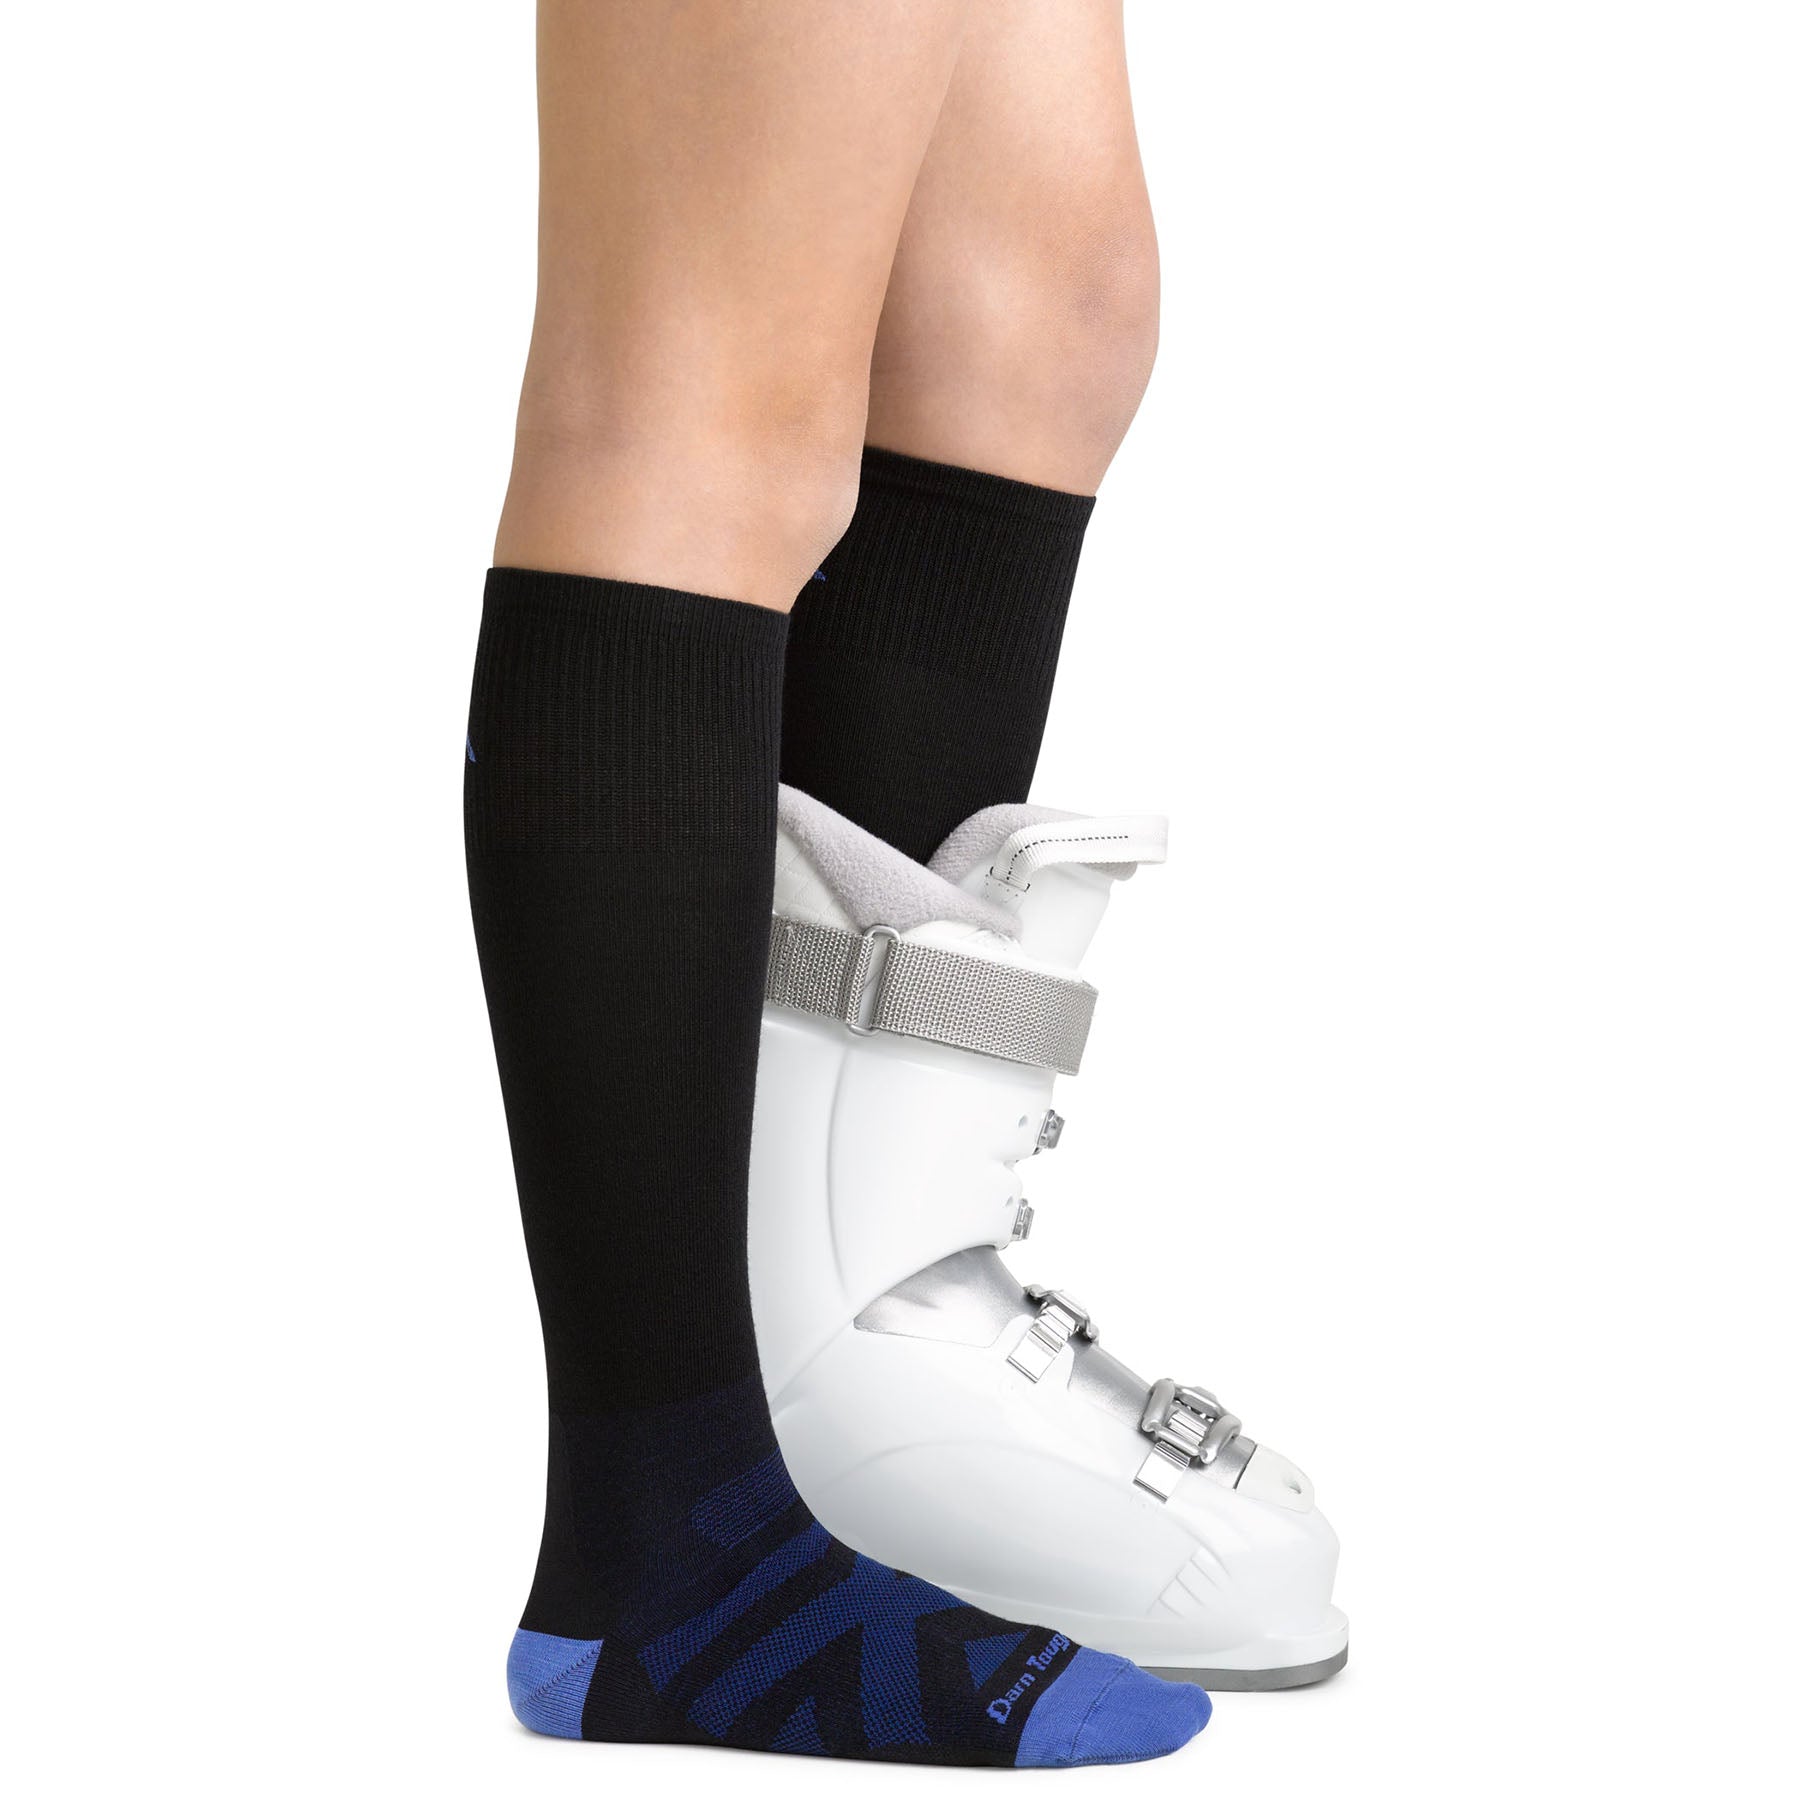 Knee down image of a child model with the RFL sock on their right foot and the sock and a ski boot on the left.